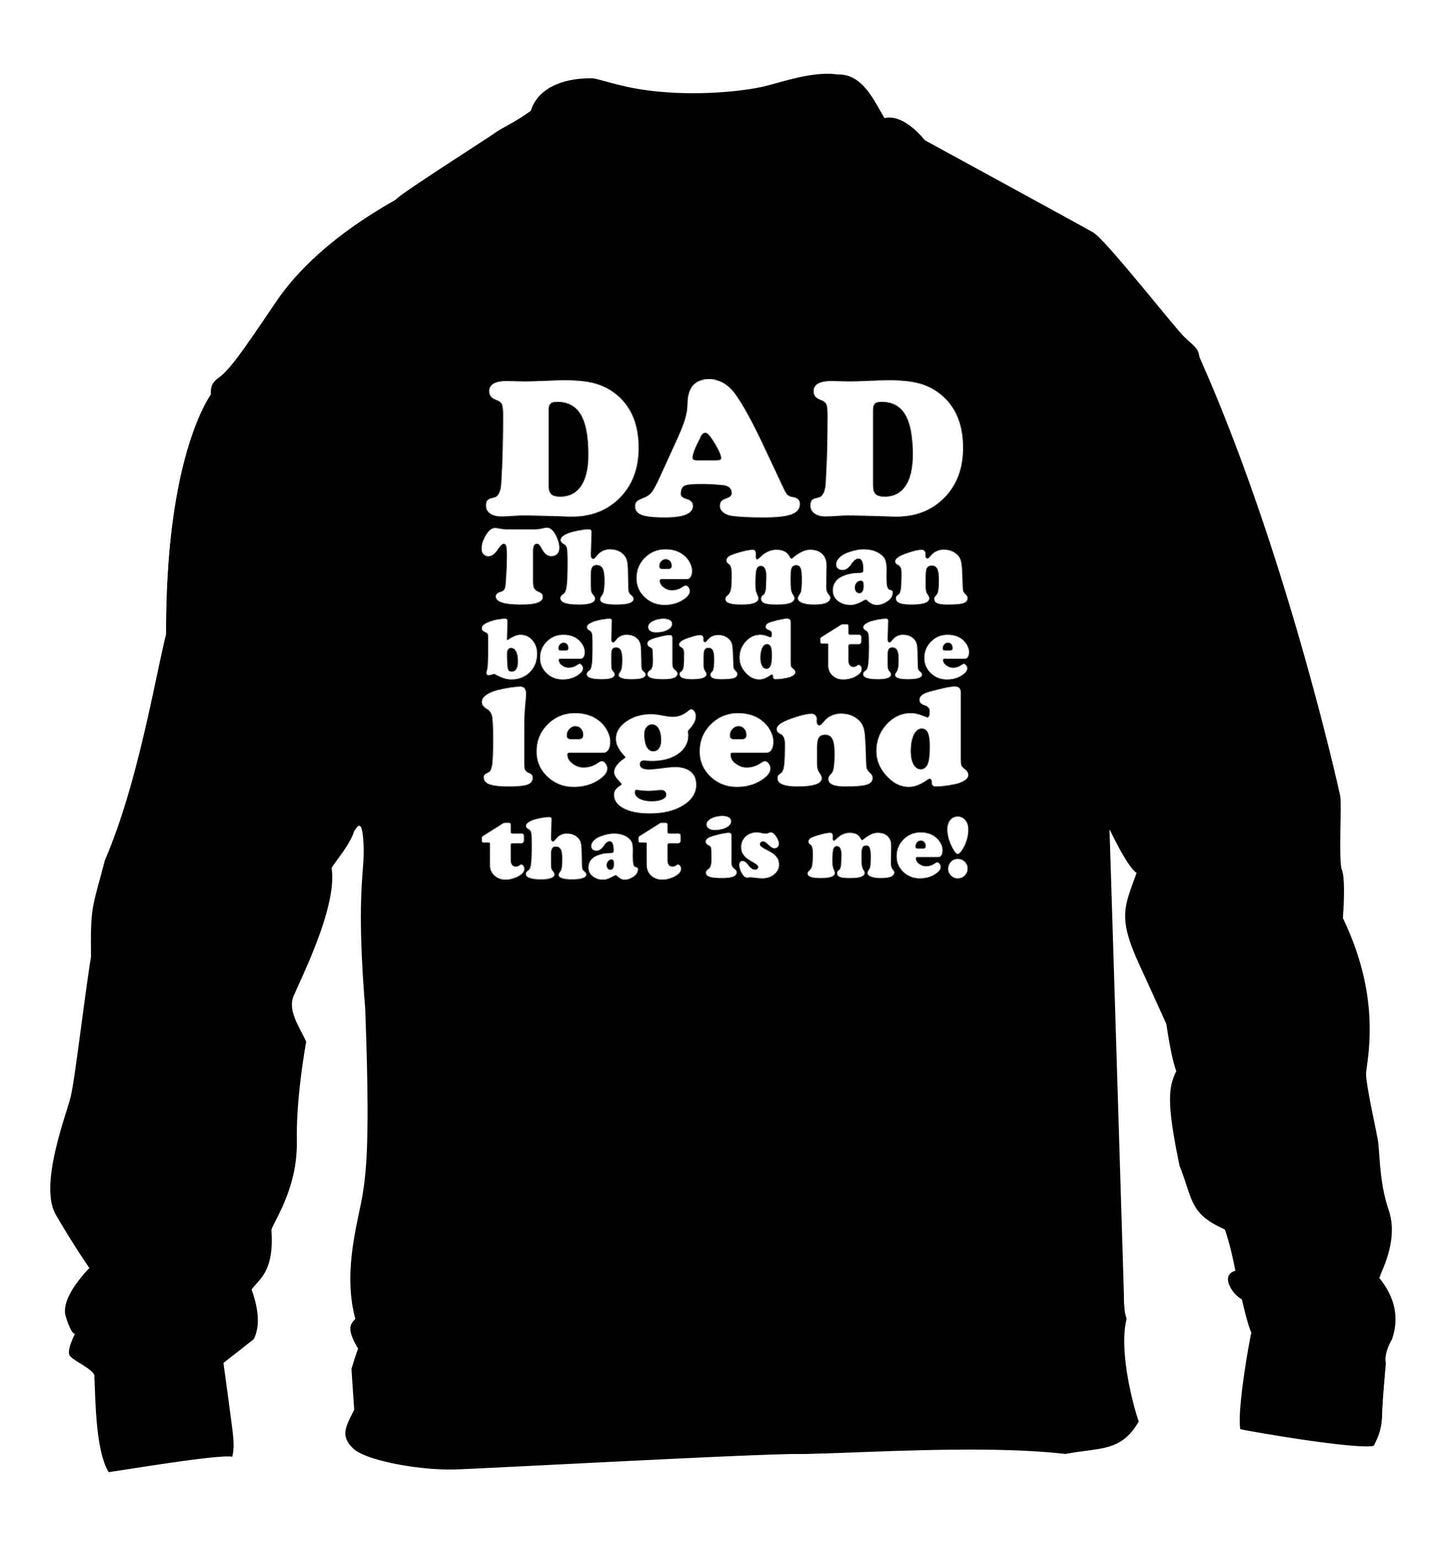 Dad the man behind the legend that is me children's black sweater 12-13 Years